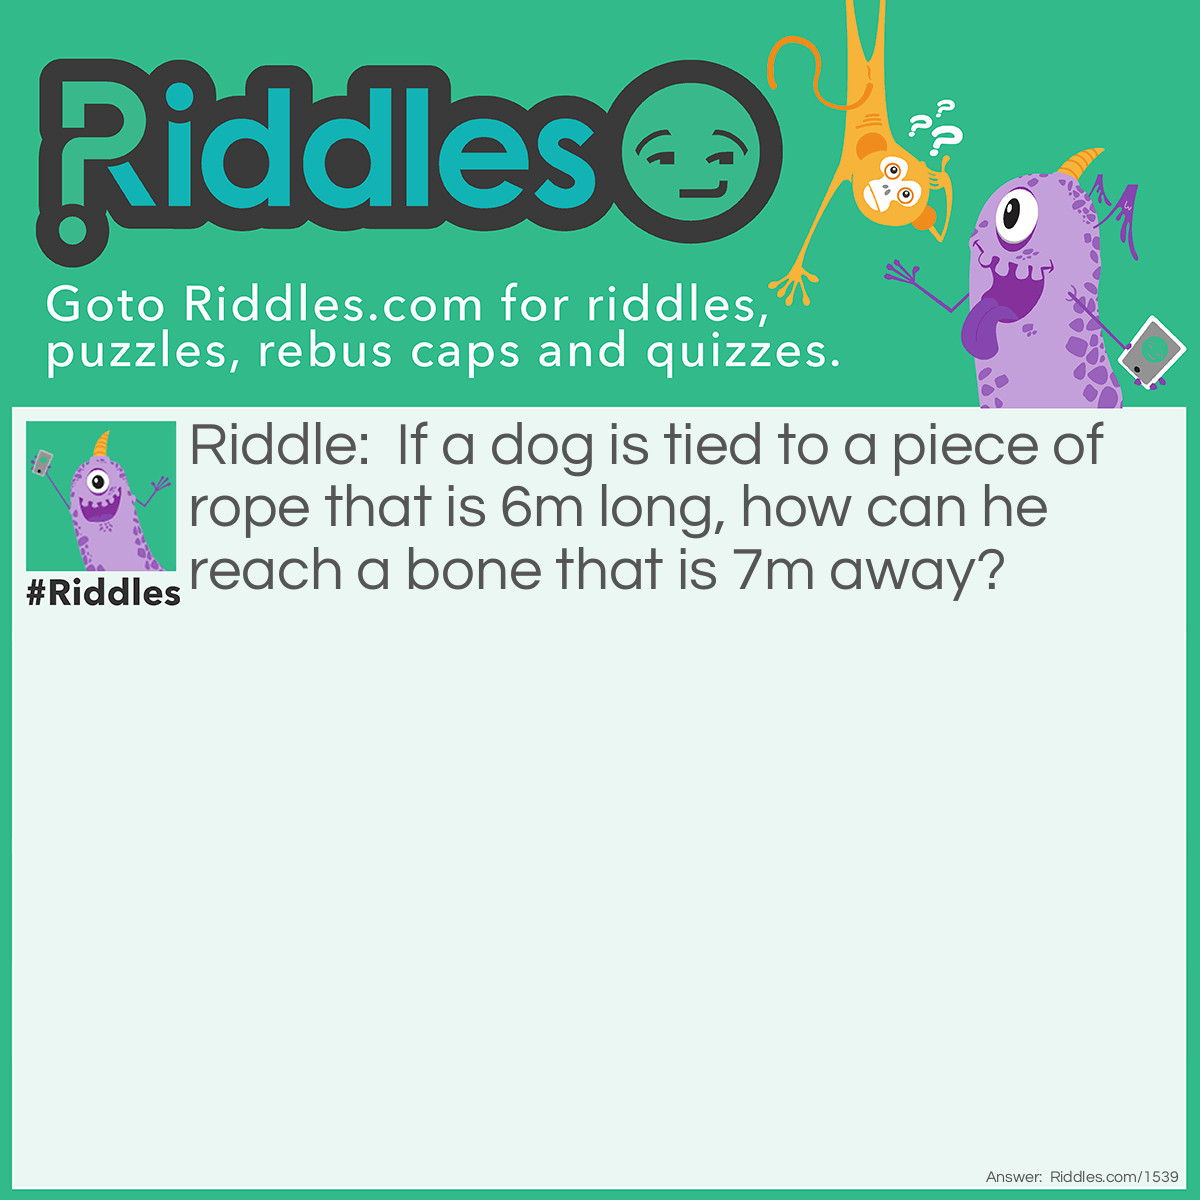 Riddle: If a dog is tied to a piece of rope that is 6m long, how can he reach a bone that is 7m away? Answer: The other end is not tied to anything.